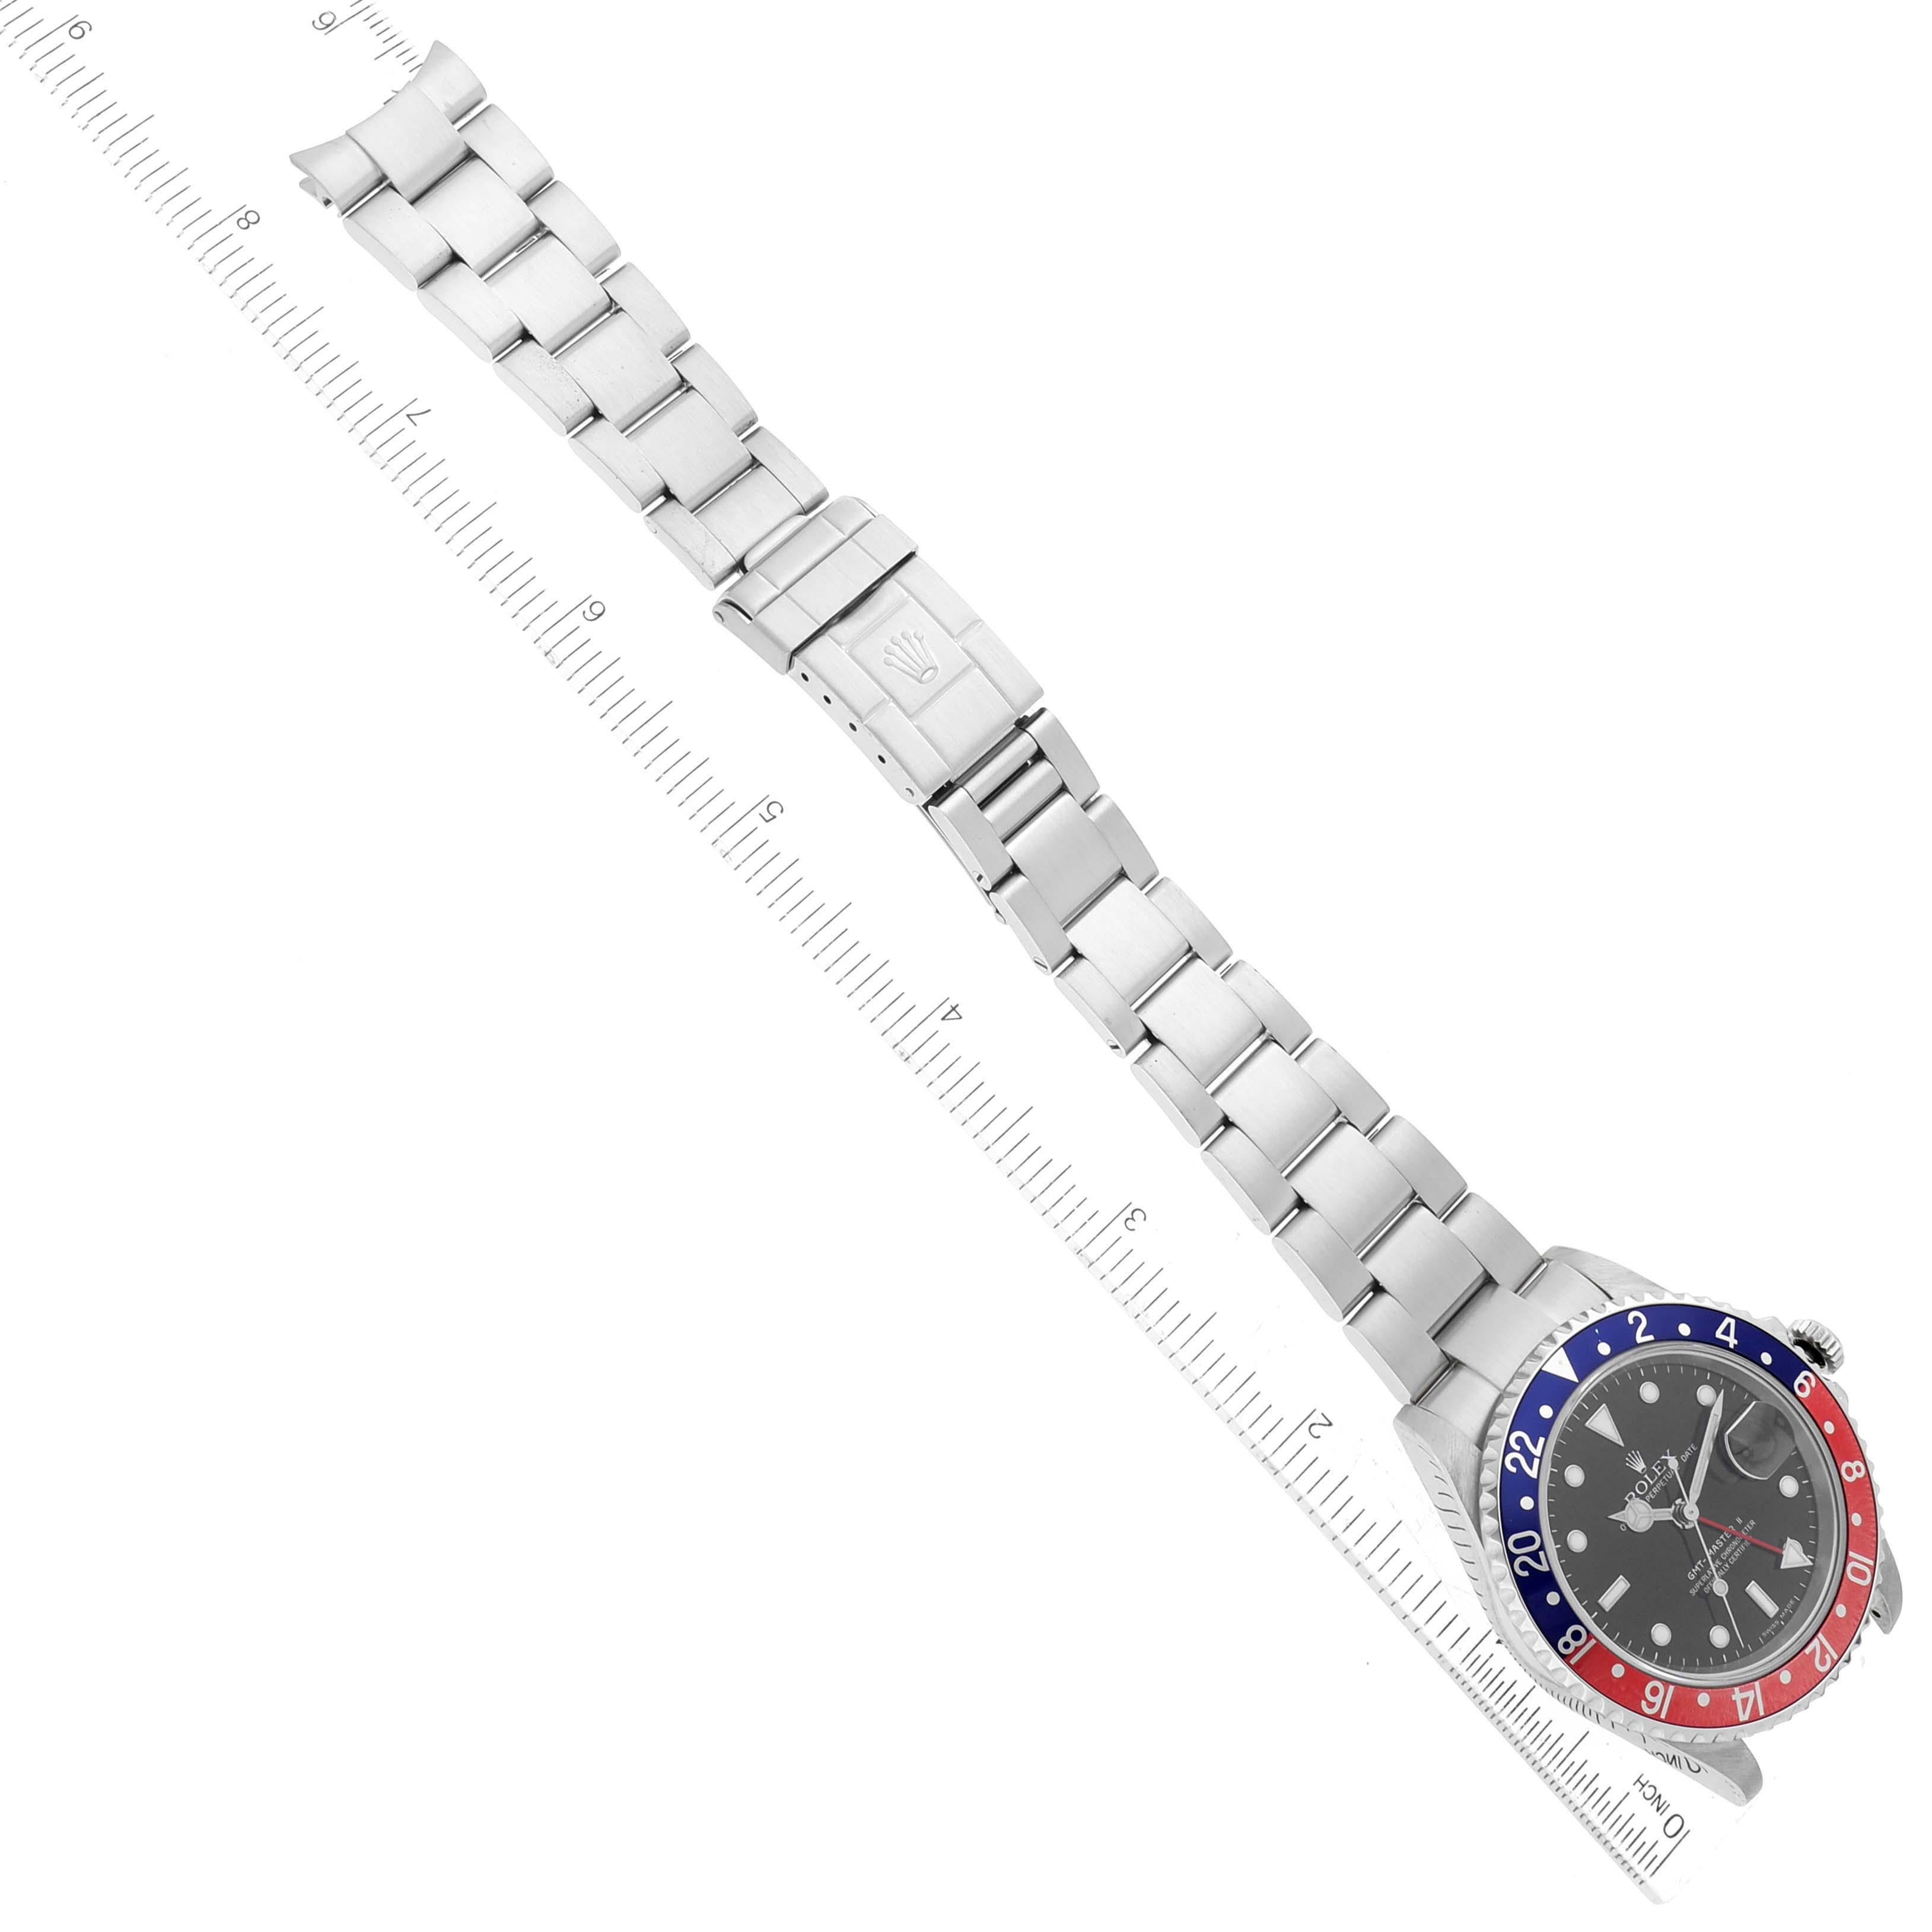 Rolex GMT Master II Blue Red Pepsi Error Dial Steel Mens Watch 16710 Box Papers 2